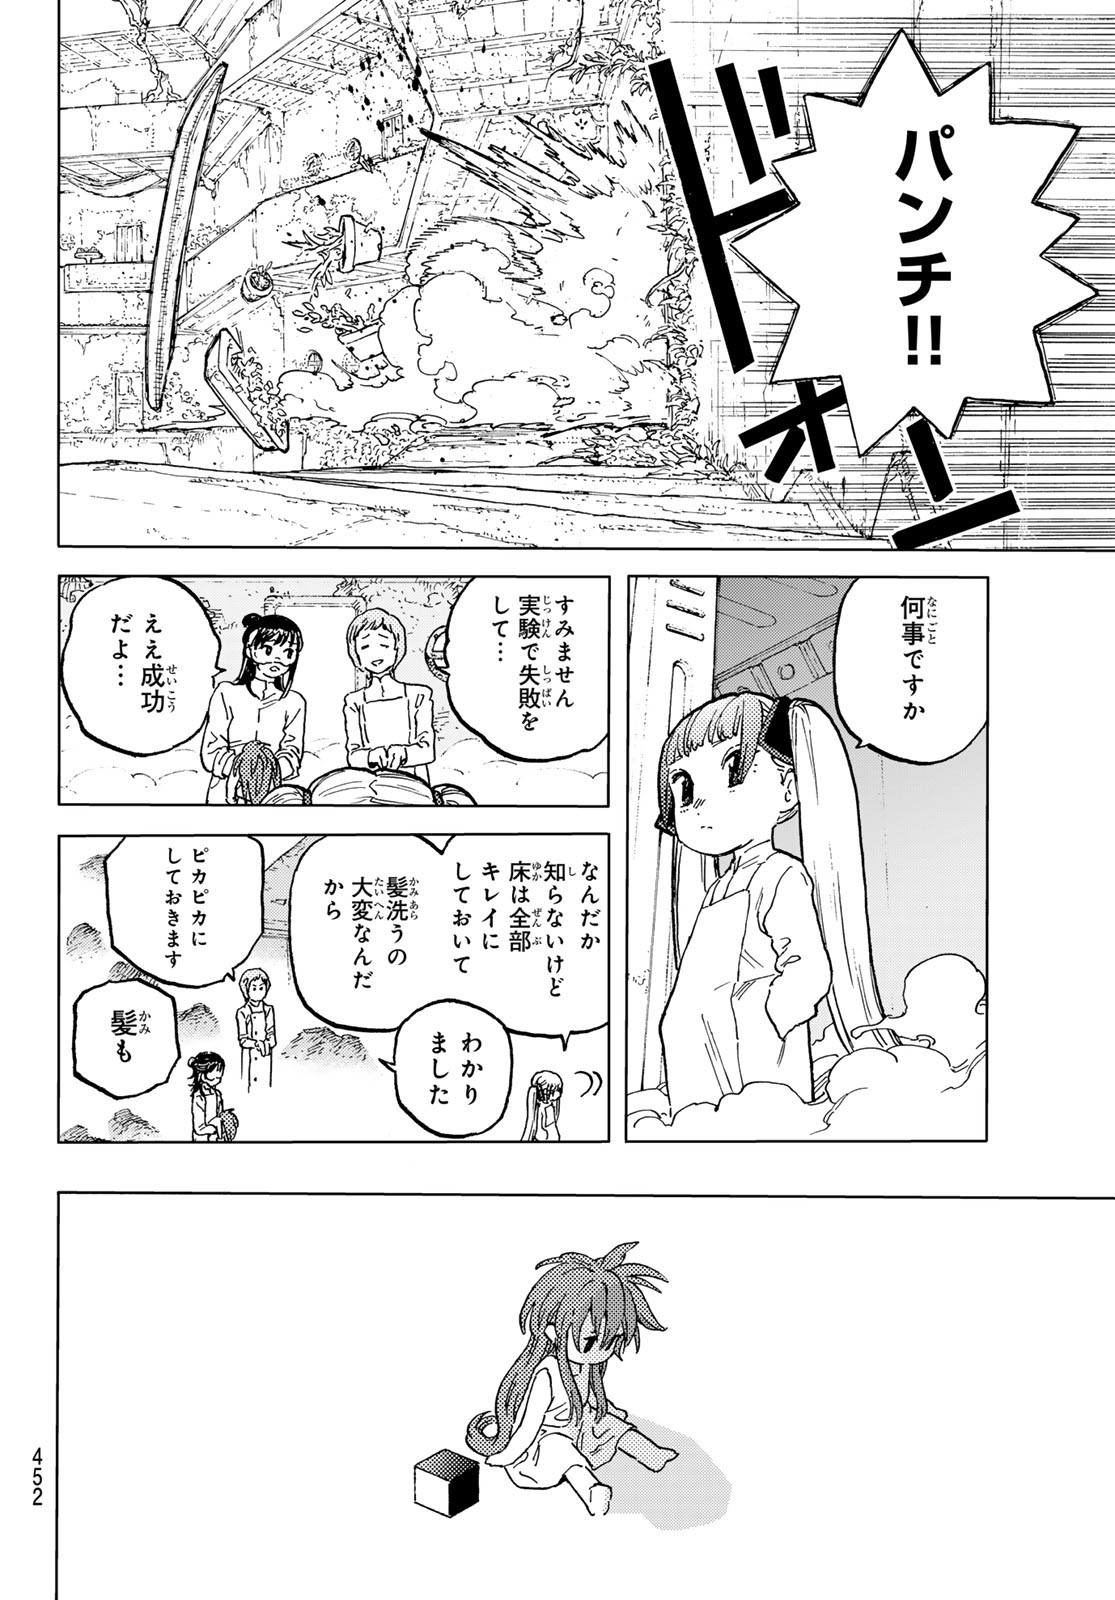 Weekly Shōnen Magazine - 週刊少年マガジン - Chapter 2024-33 - Page 450